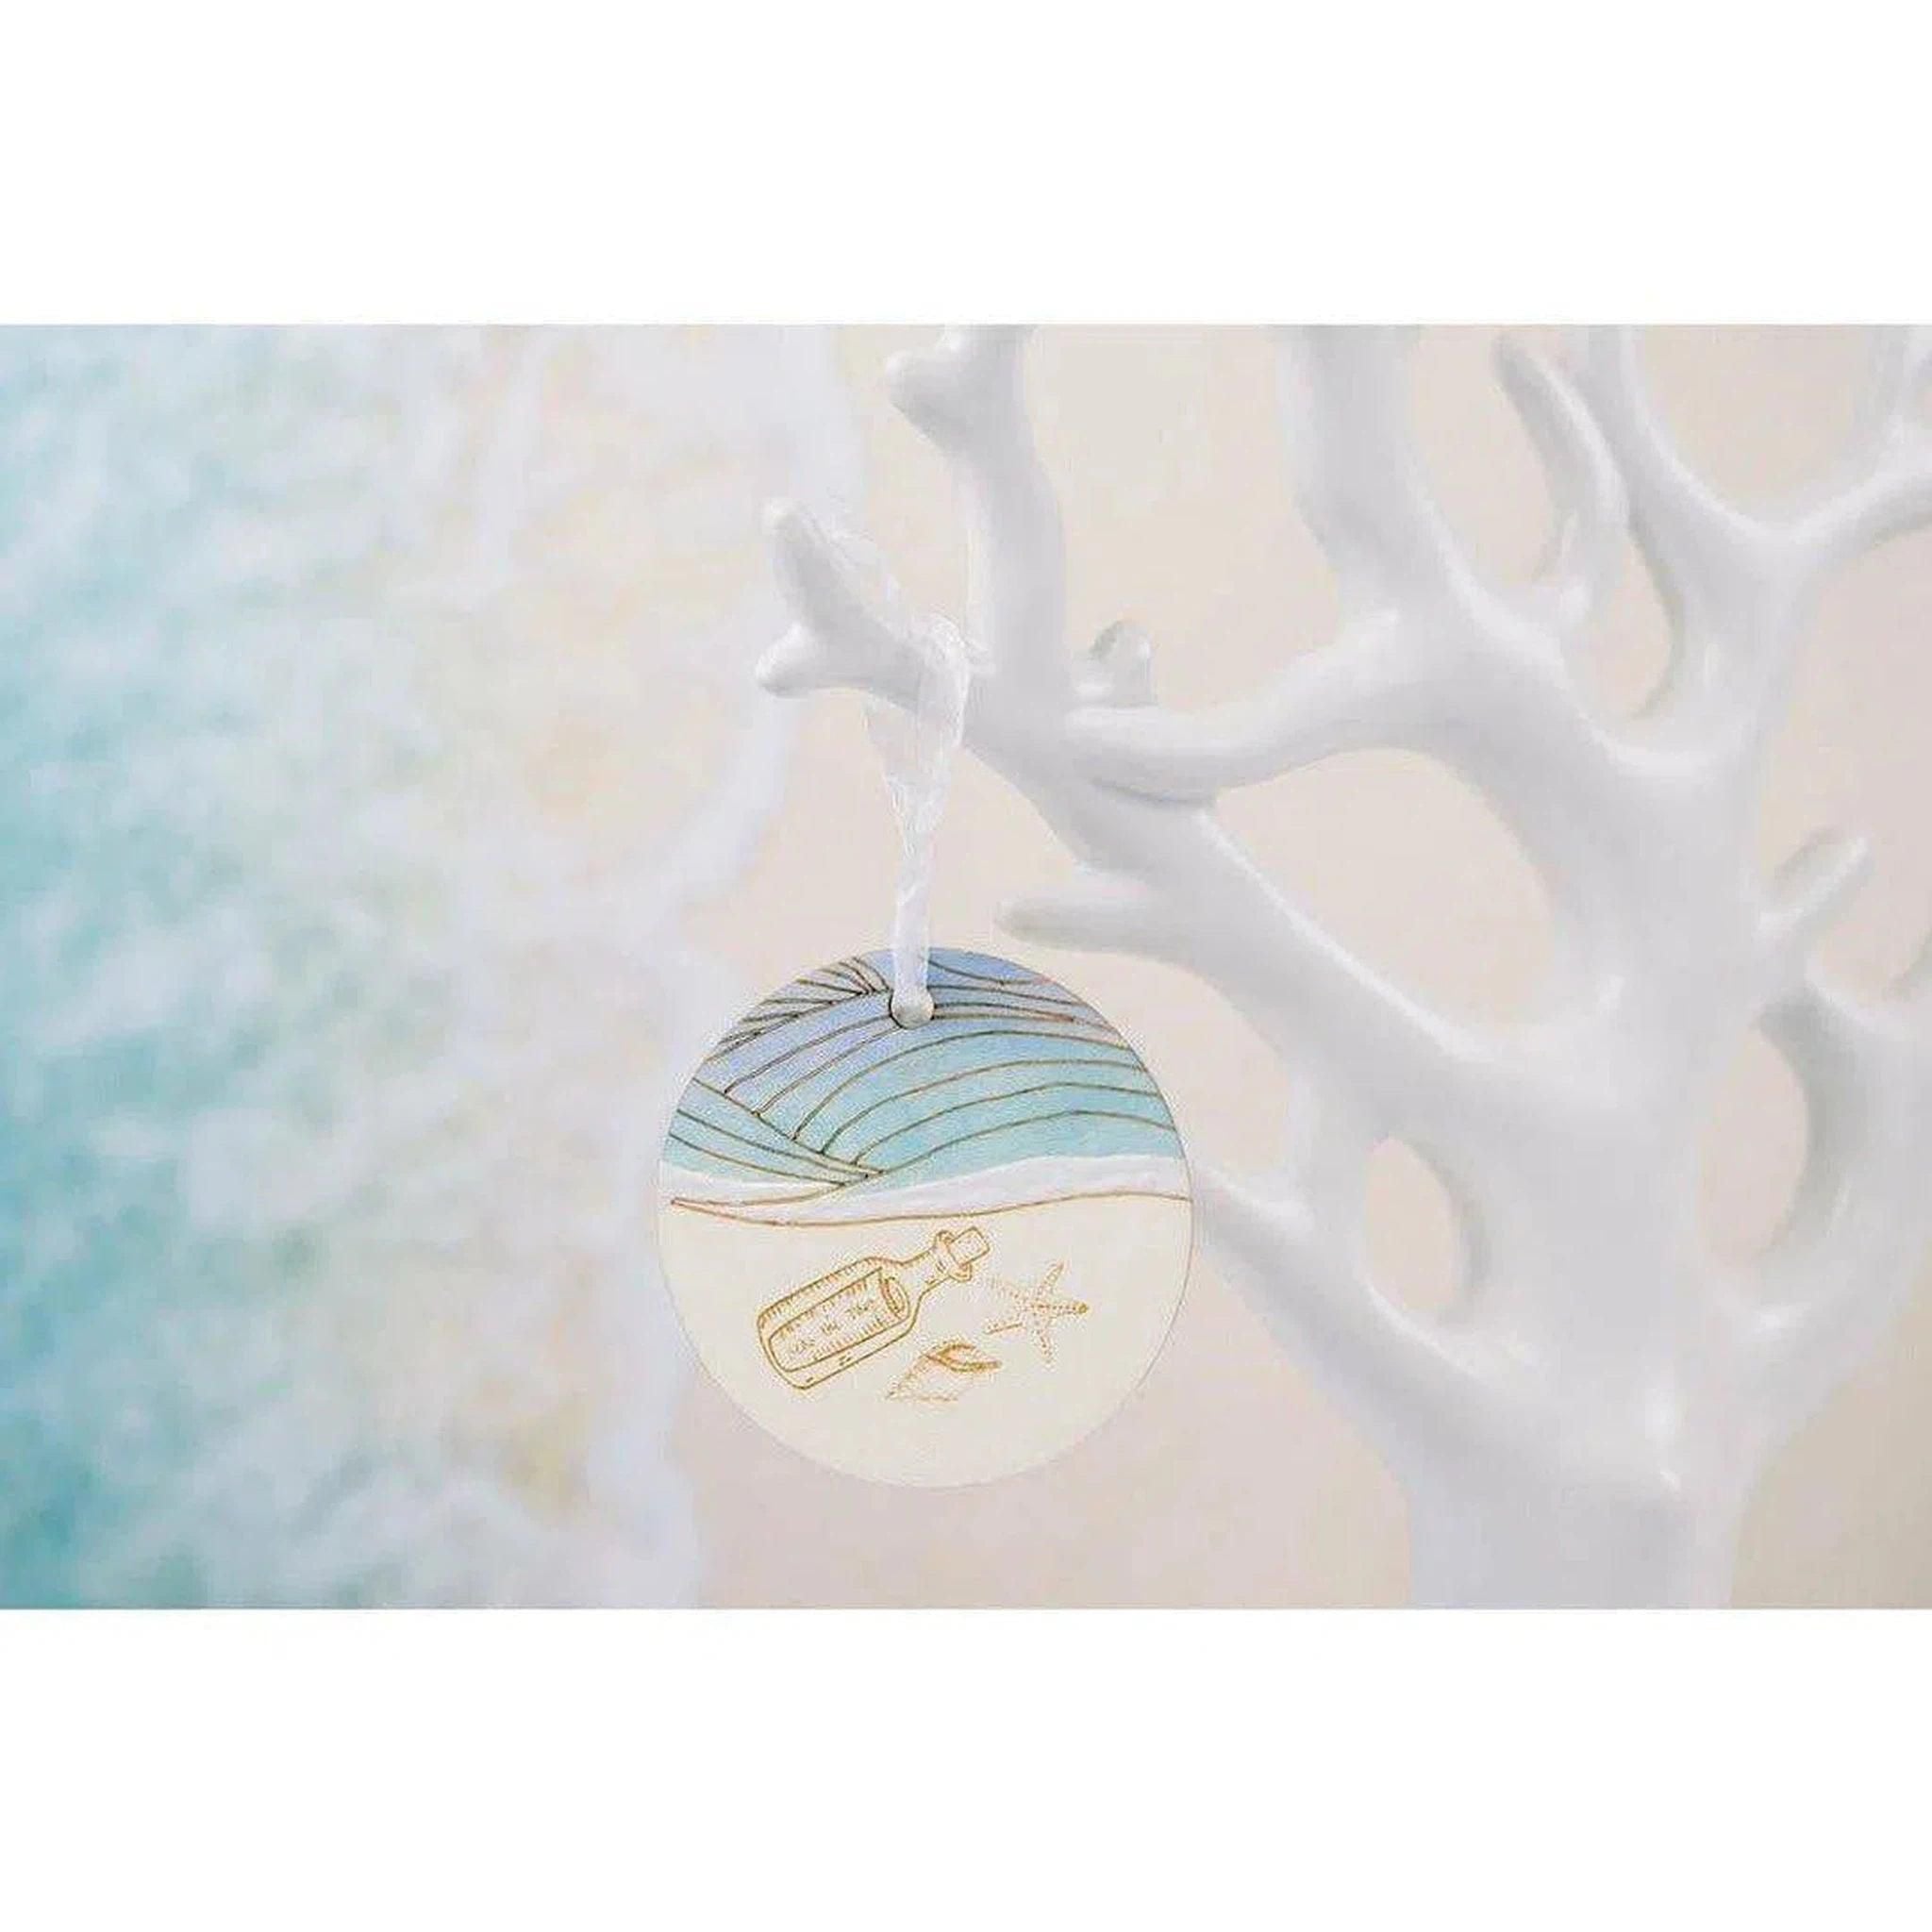 Hand-painted Seas the Day Ornament